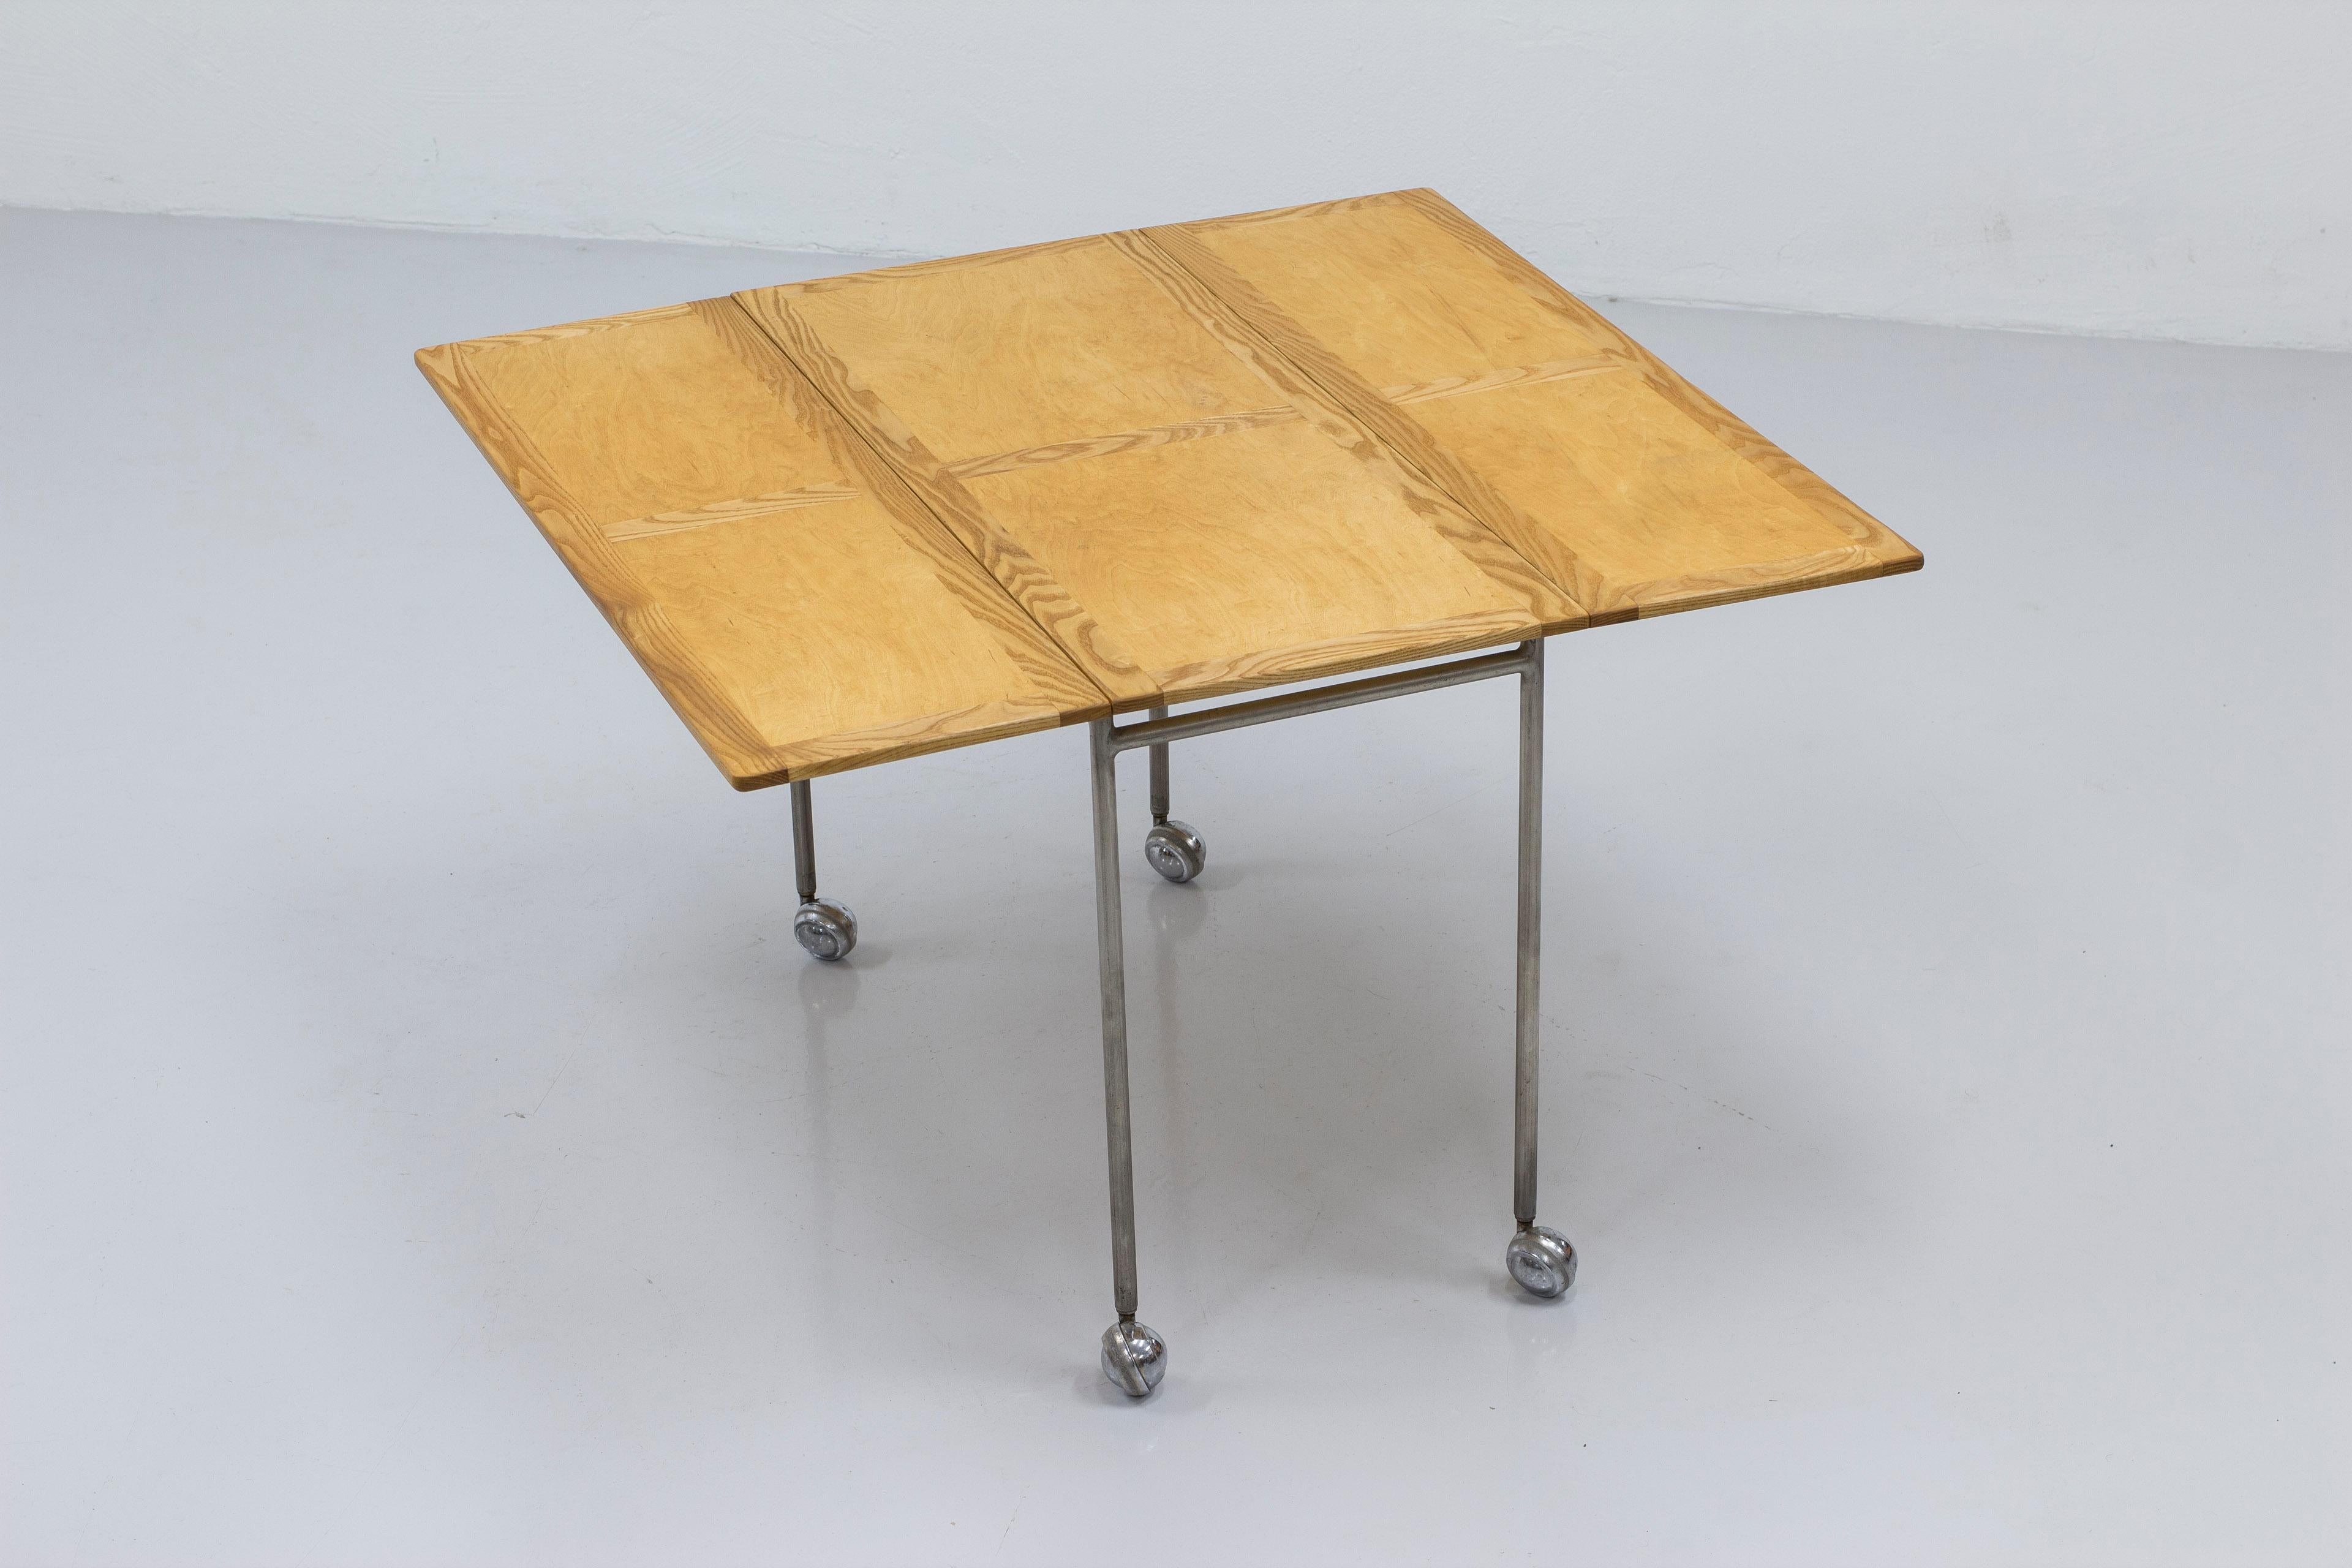 Extendable side table model Berit designed by Bruno Mathsson. Produced by Firma Karl Mathsson in Värnamo Sweden during the 1950s. Steel base on wheels with a ash and birch table top with very nice contrasting grain. The table extends from 40-100 cm